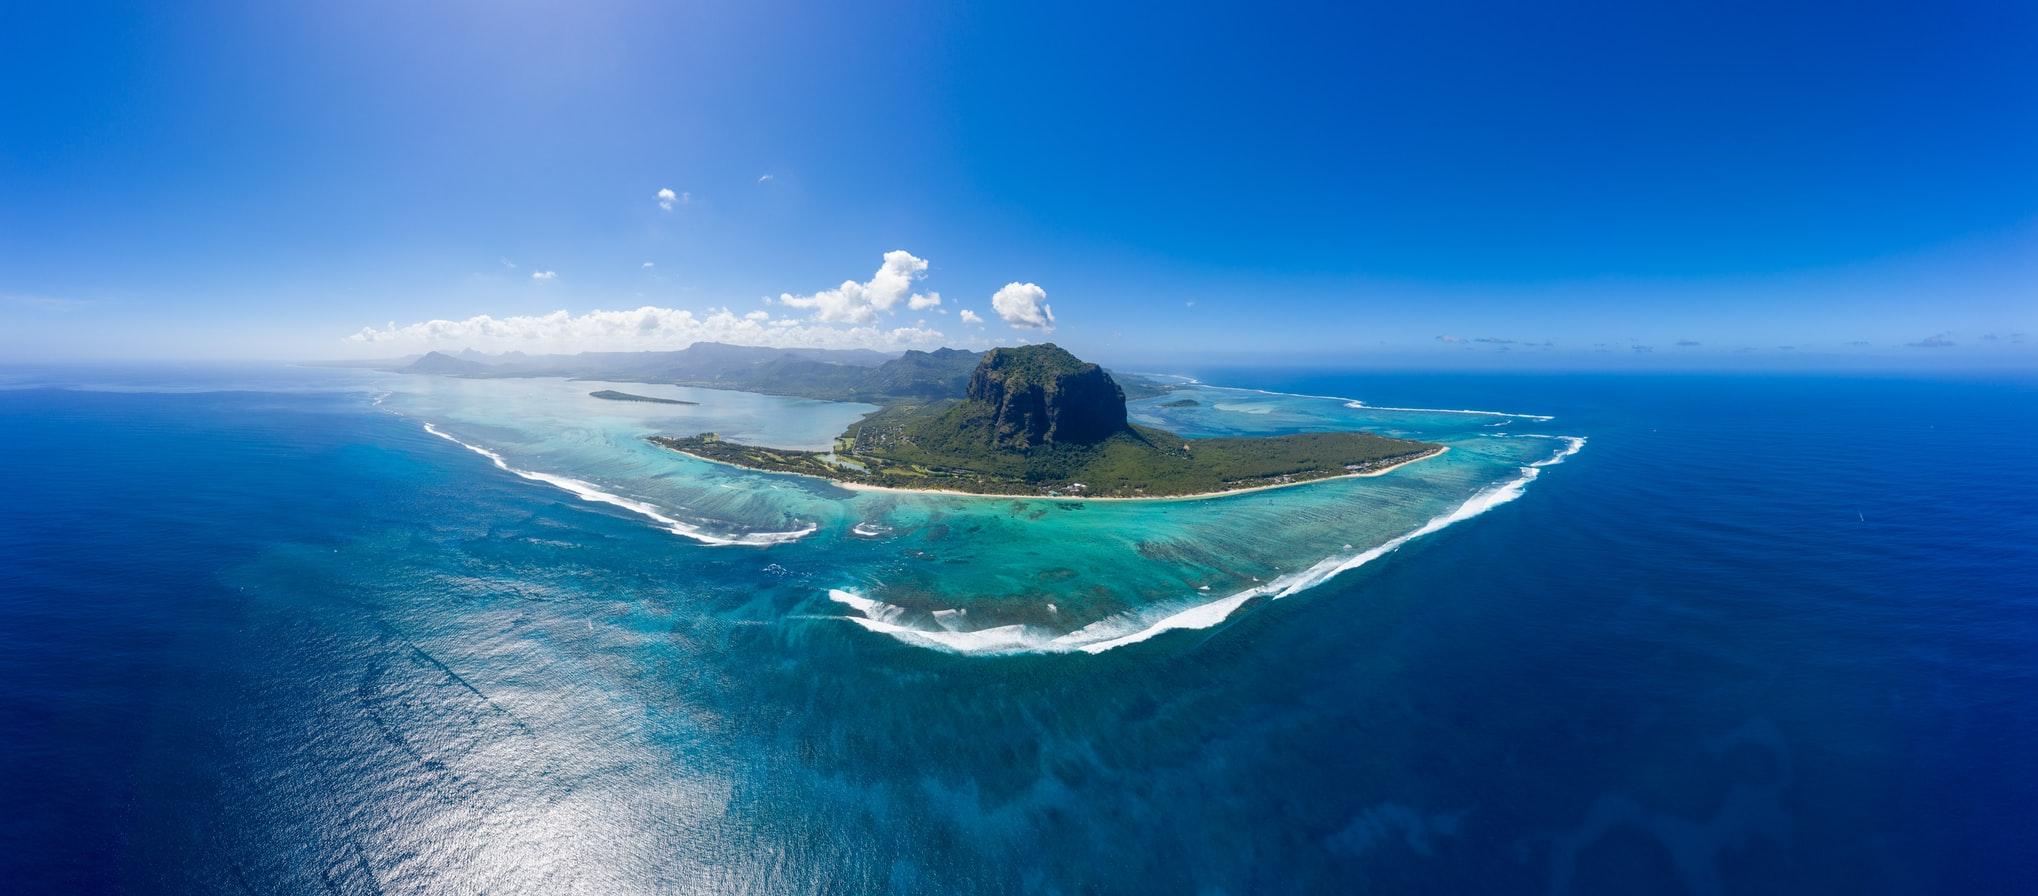 Why You Should Choose Mauritius For Your Honeymoon Vacation